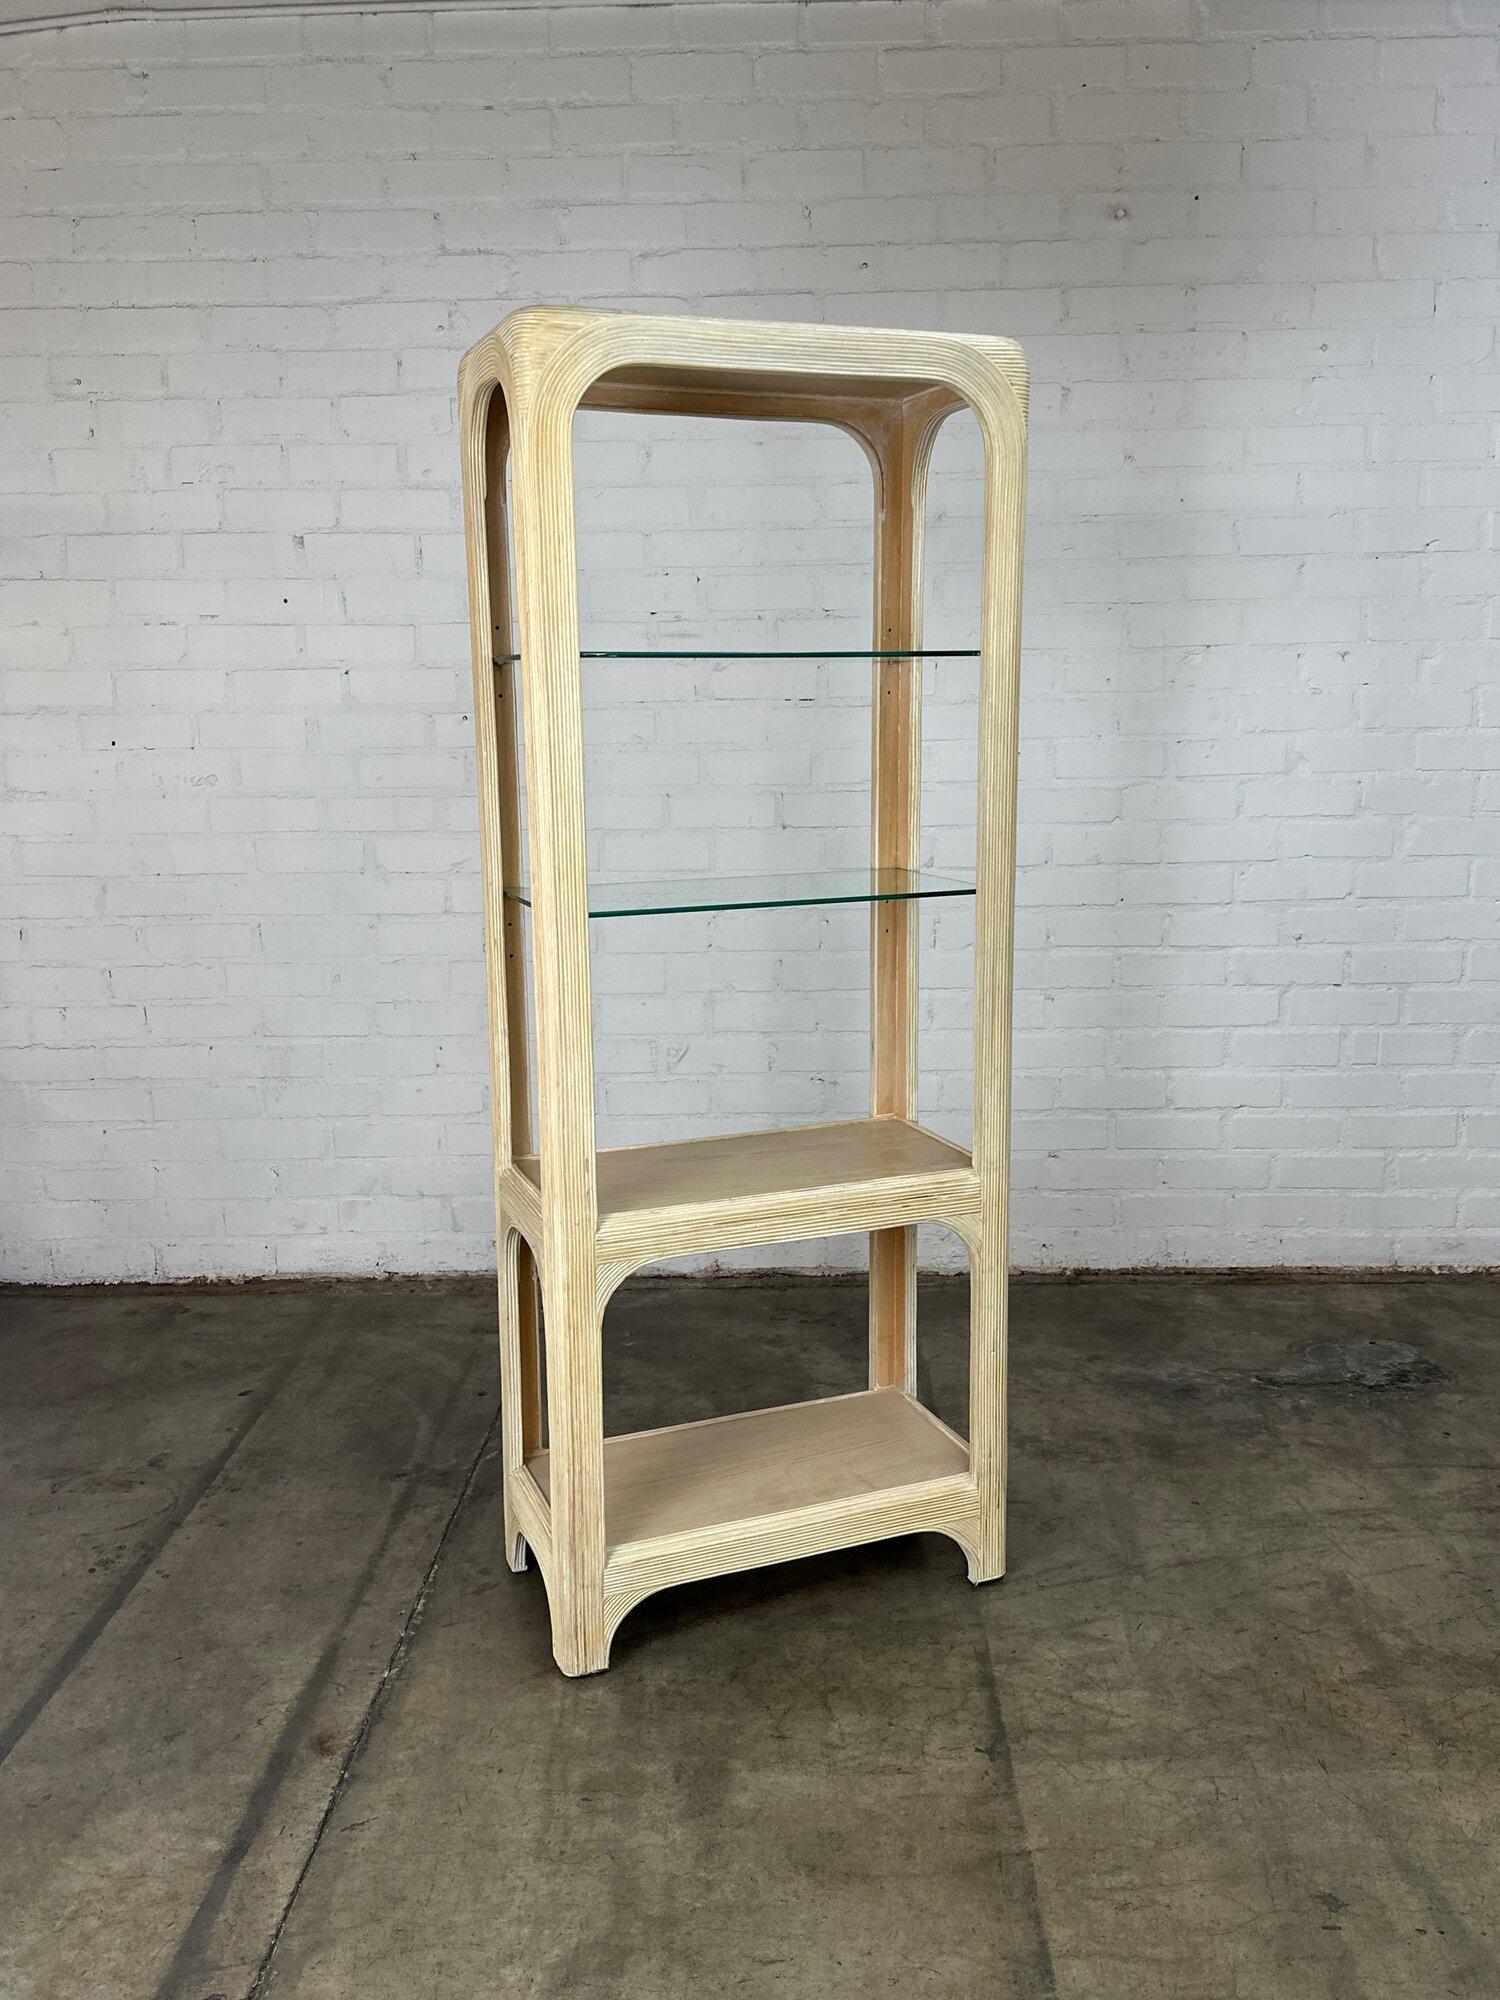 W30 D16 H76.5 Bottom Clearance17.5 shelves adjustable

Vintage reeded bookcases with thick glass shelving. Each unit is structurally sound with no major areas of wear. Wood is well preserved with no breaks or chips in wood or glass. 

